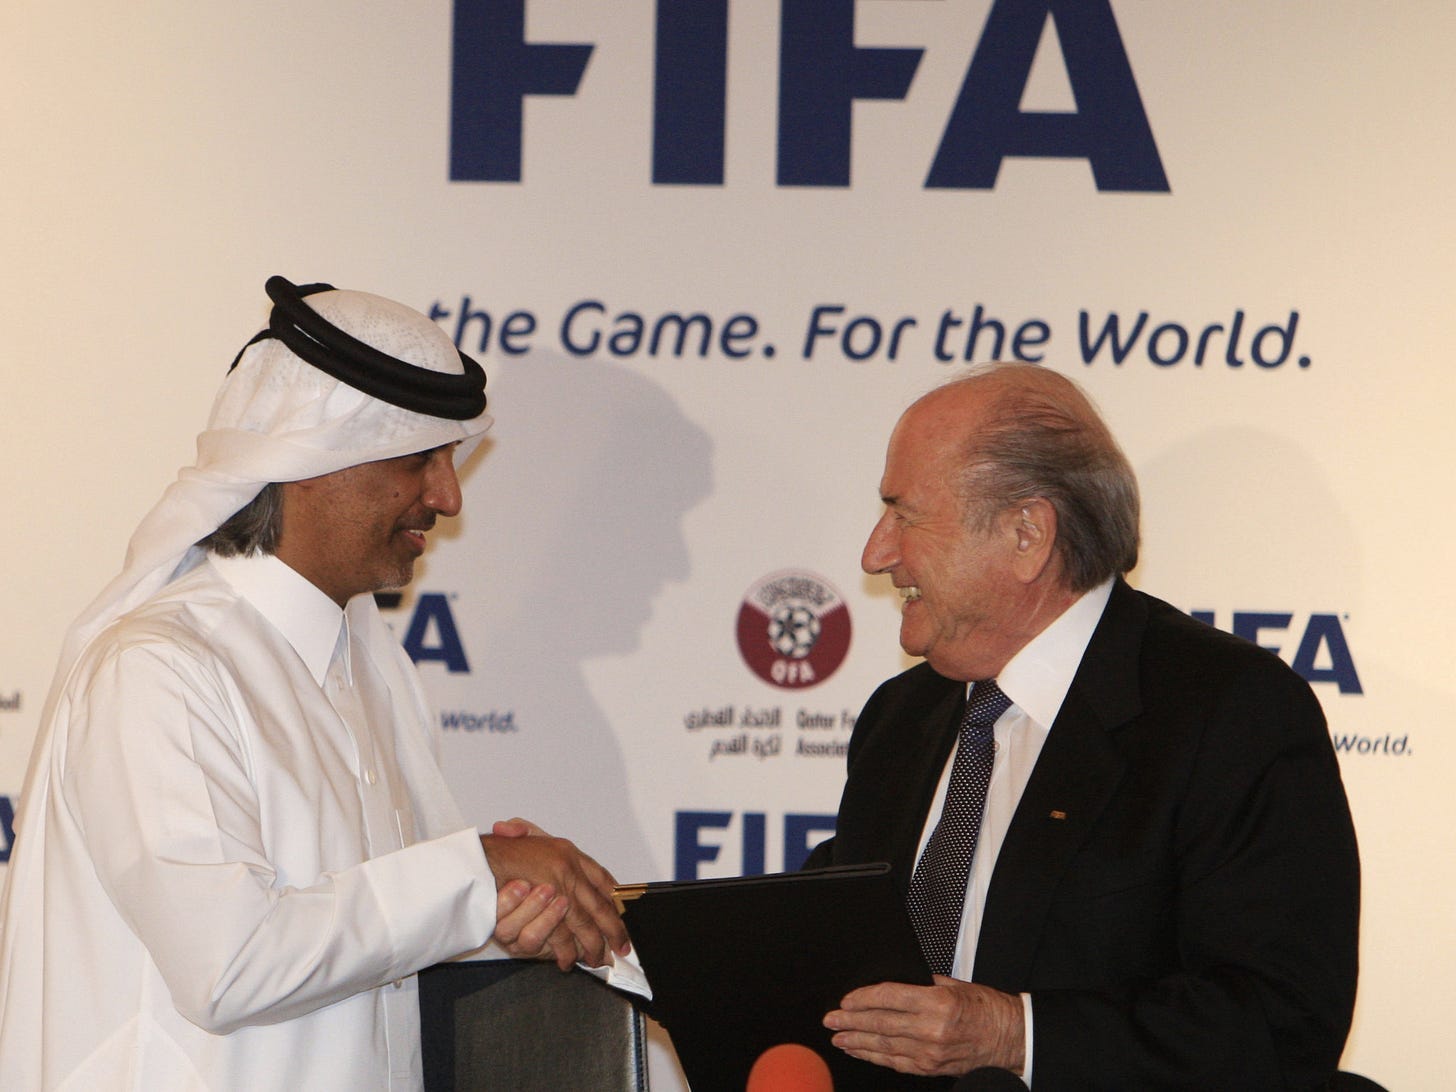 Image result from https://www.cpr.org/2014/11/13/fifa-clears-qatar-russia-of-world-cup-corruption-ignites-furor/